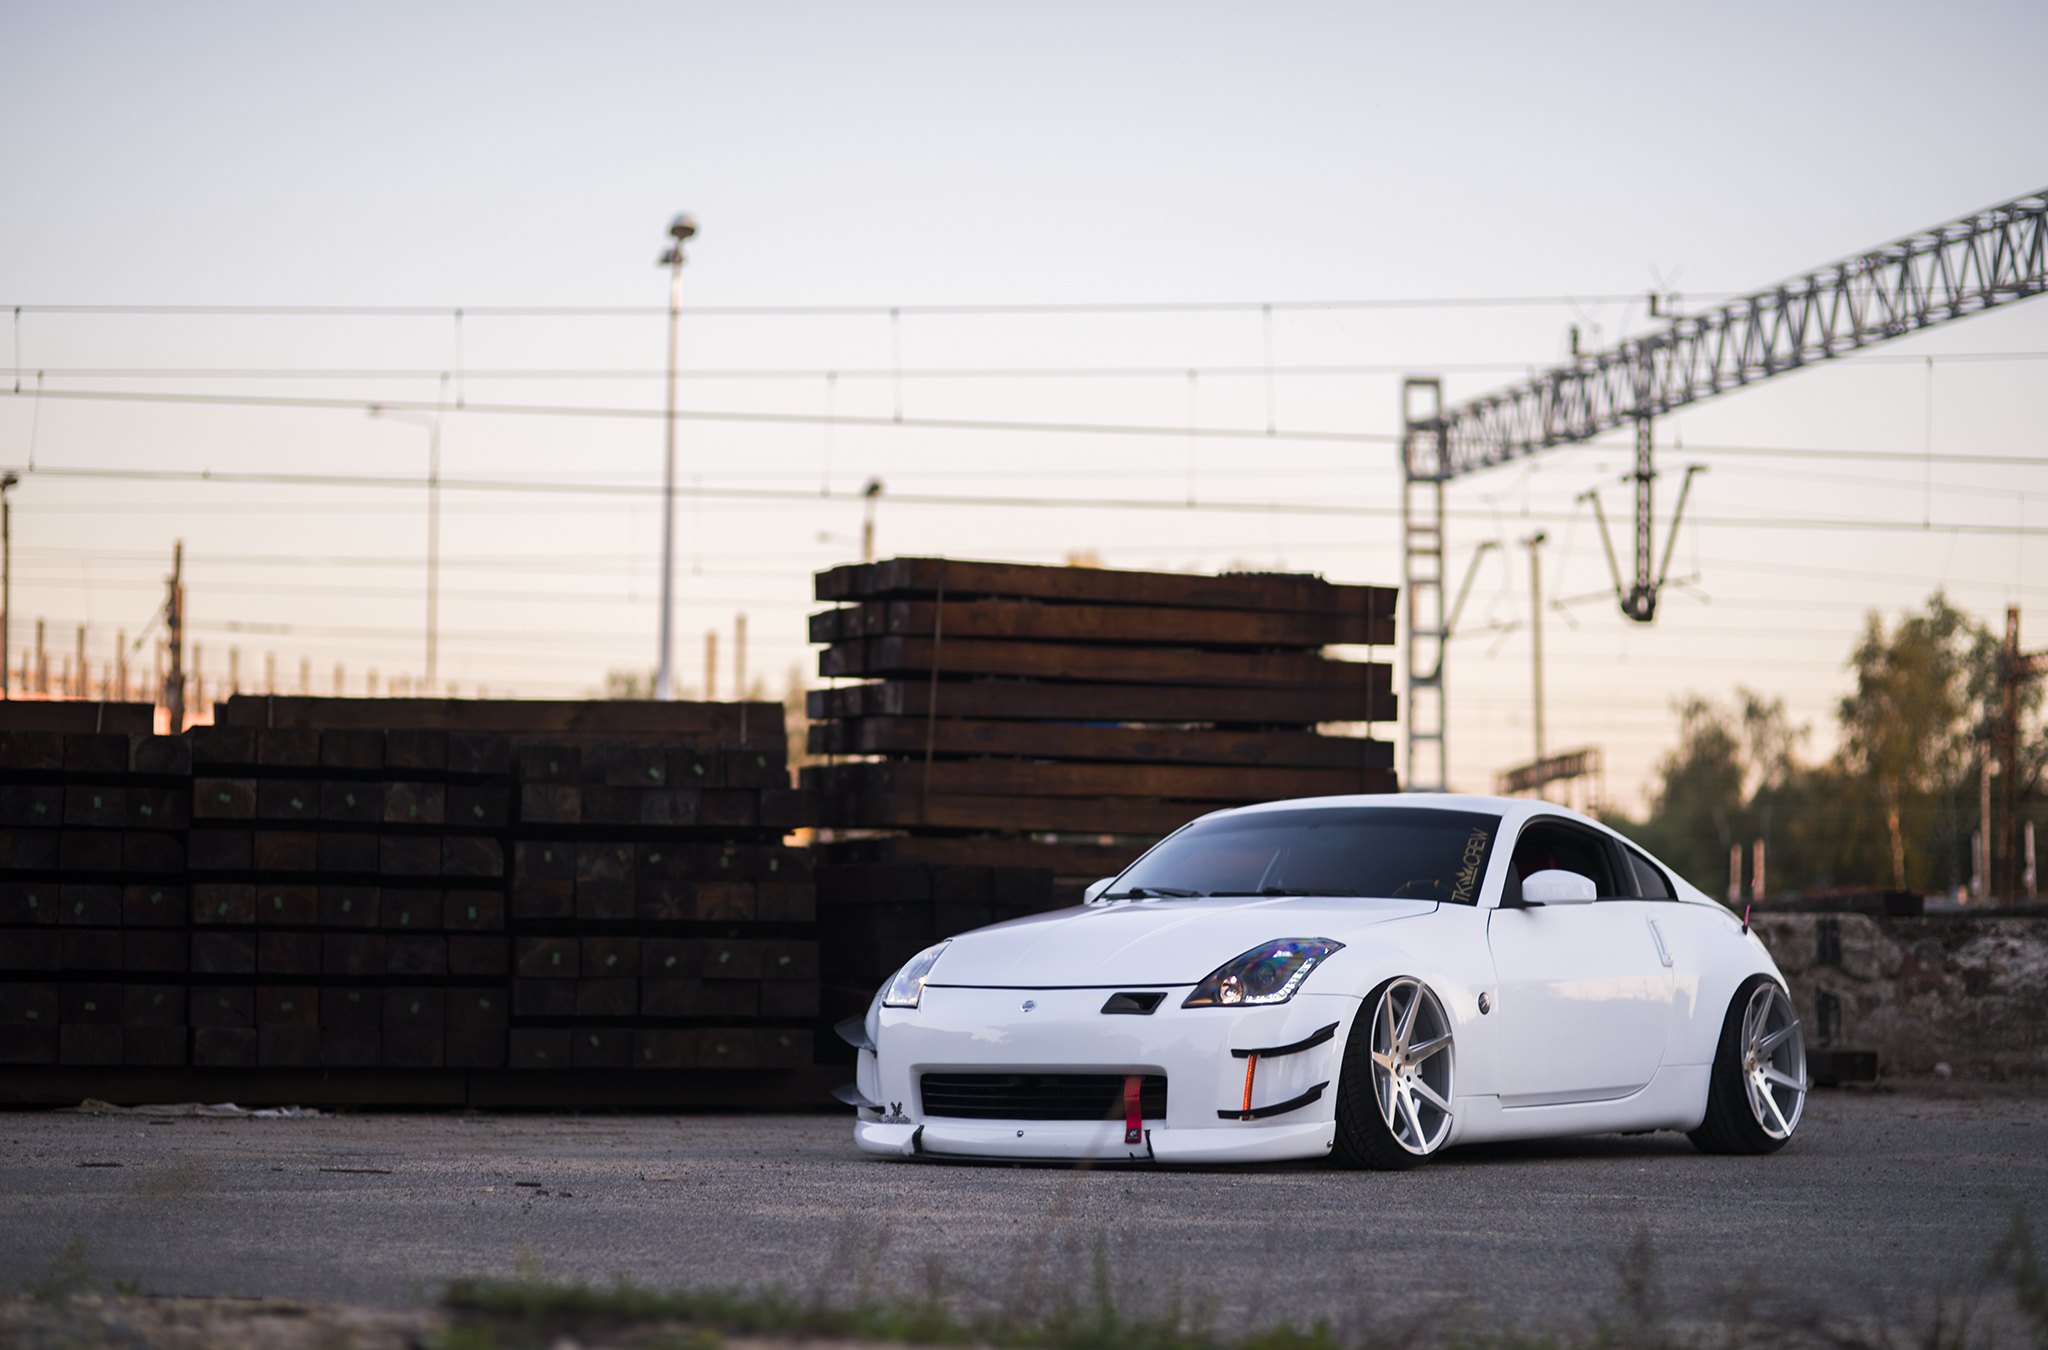 White Stanced Nissan 350Z with Custom Front Bumper - Photo by JR Wheels